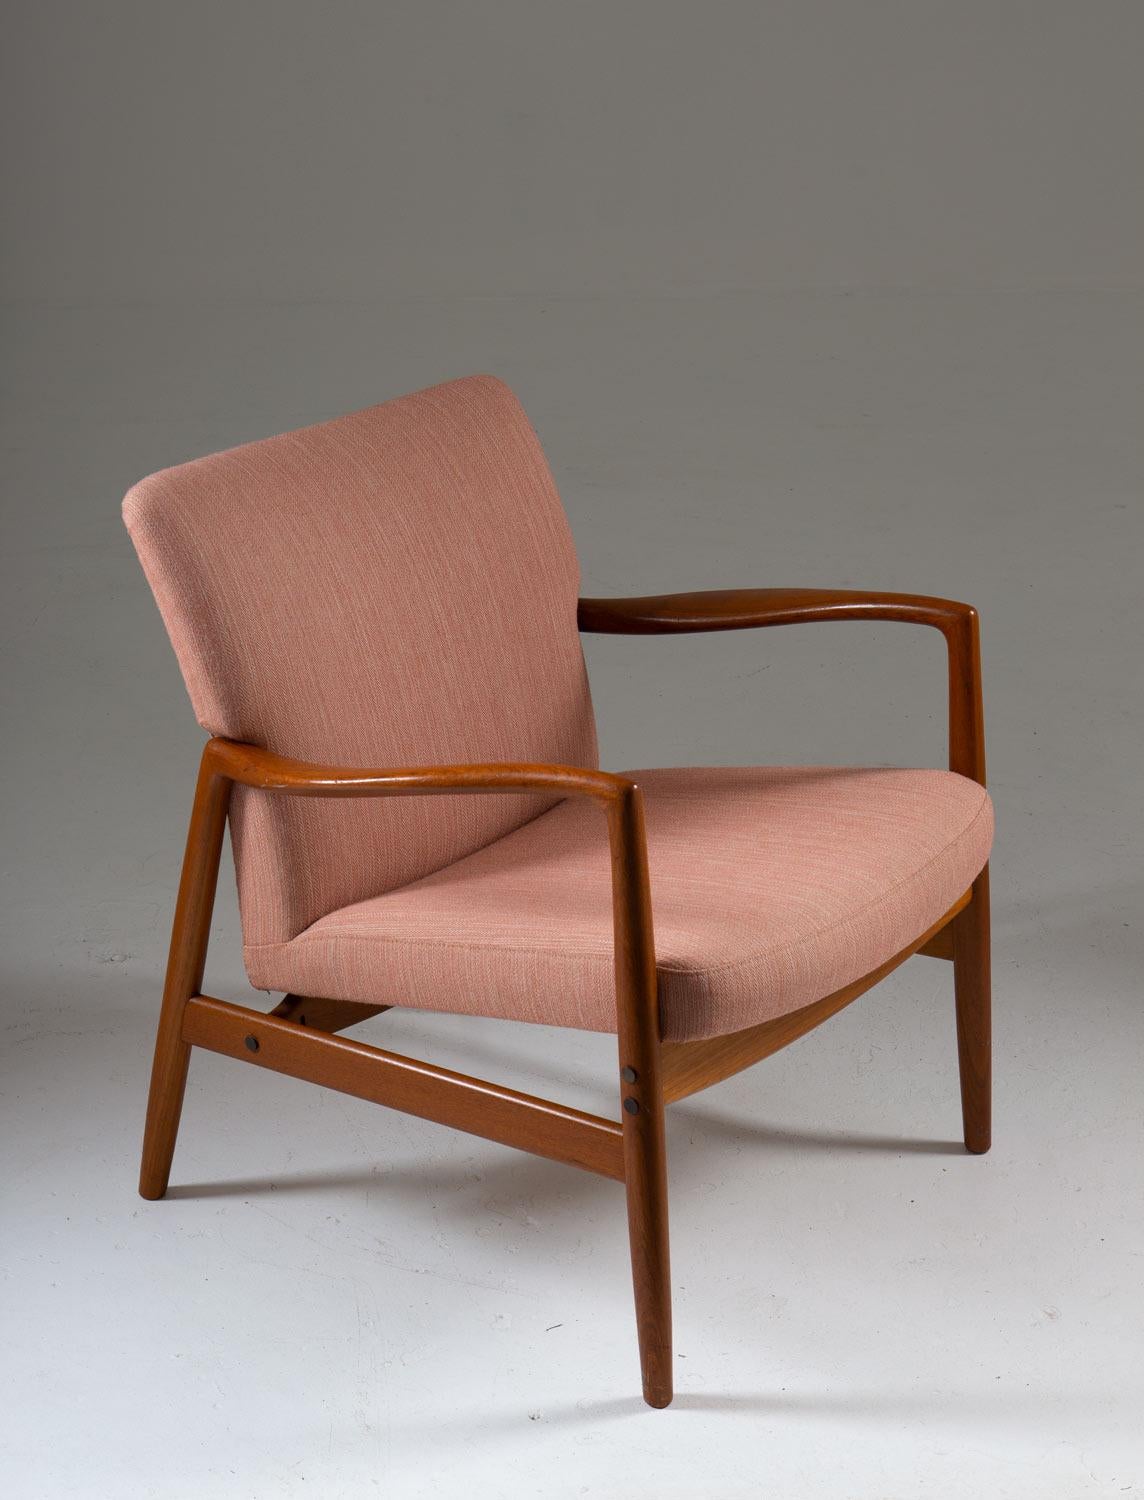 Rare Mid-Century Modern lounge chair by Bertil Fridhagen for Bodafors (Sweden).
This chair has a timeless classic design. It features a teak frame, holding the seating and backrest which are upholstered in a pink wool fabric. The armrests are